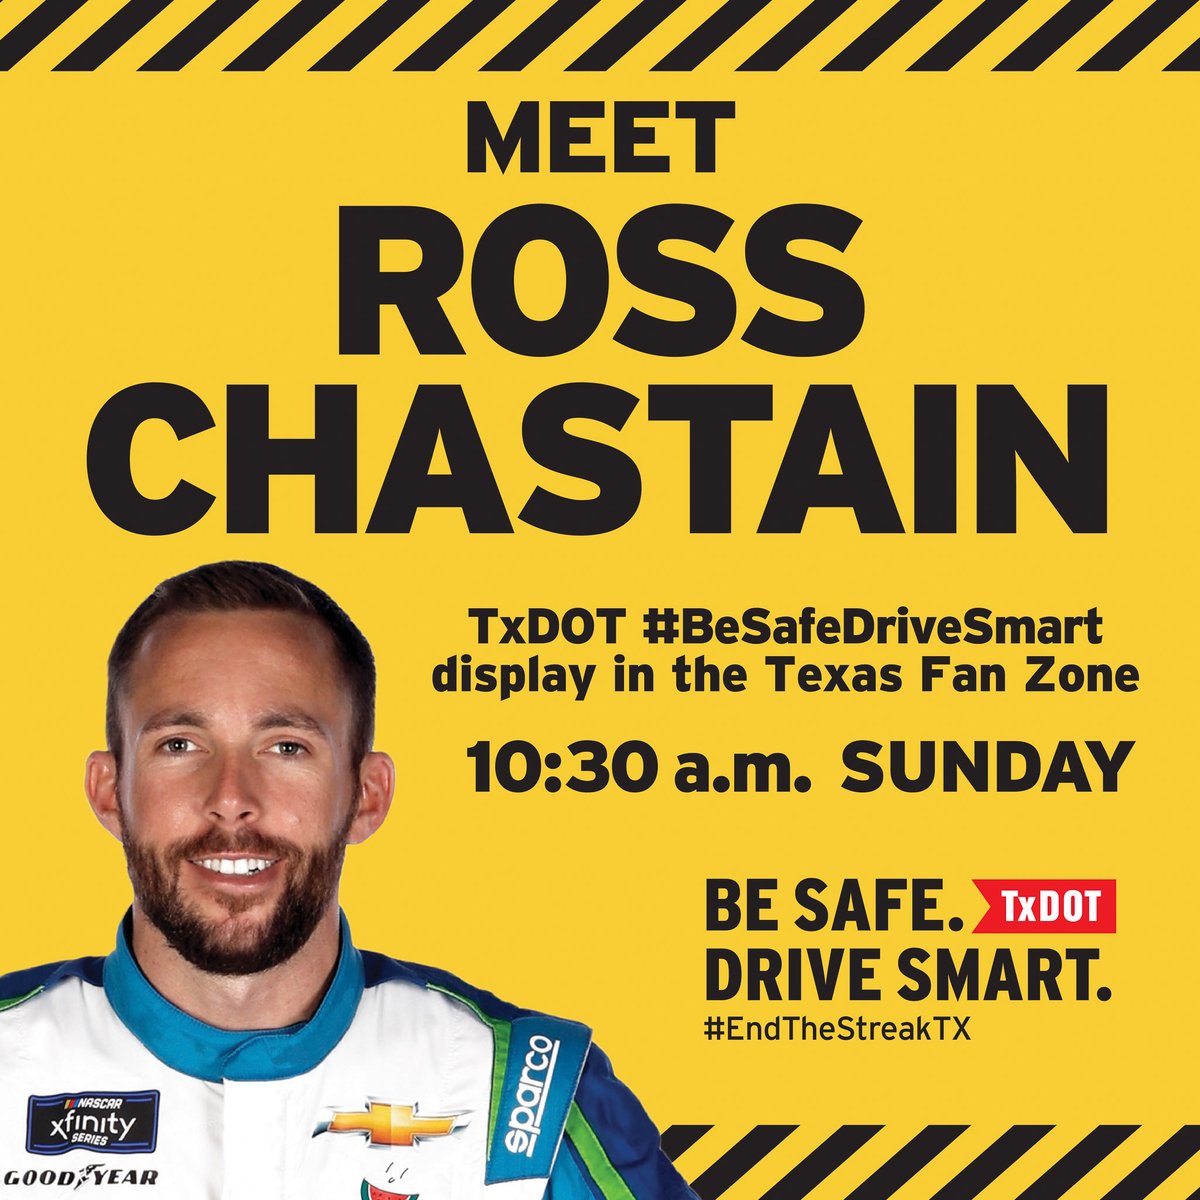 Join me and the @TxDOT #BeSafeDriveSmart crew in the Fan Zone on Sunday at 10:30 am. Let’s all get there safe and leave speeding to the pros on the track!